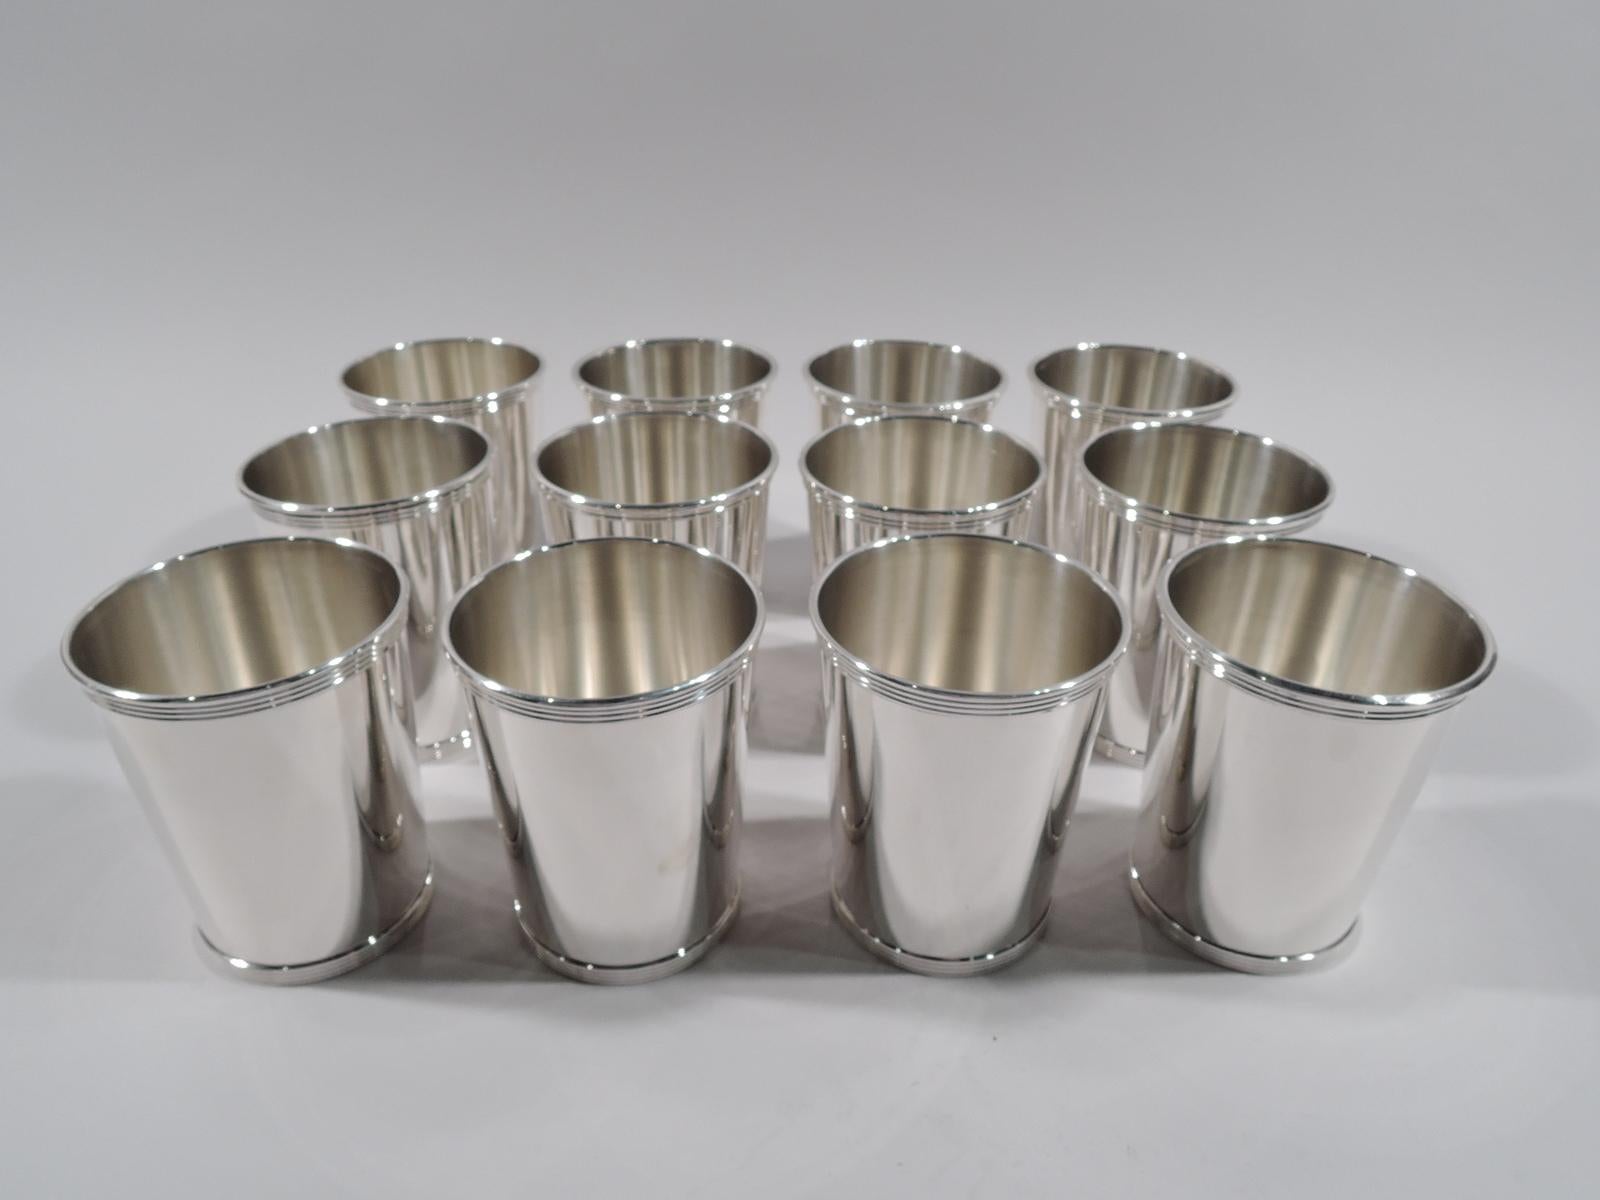 Set of 12 sterling silver mint julep cups. Made by Alvin in Providence. Each: Straight and tapering sides, and reeded rim and foot. Fully marked and numbered S251. Total weight: 46 troy ounces.